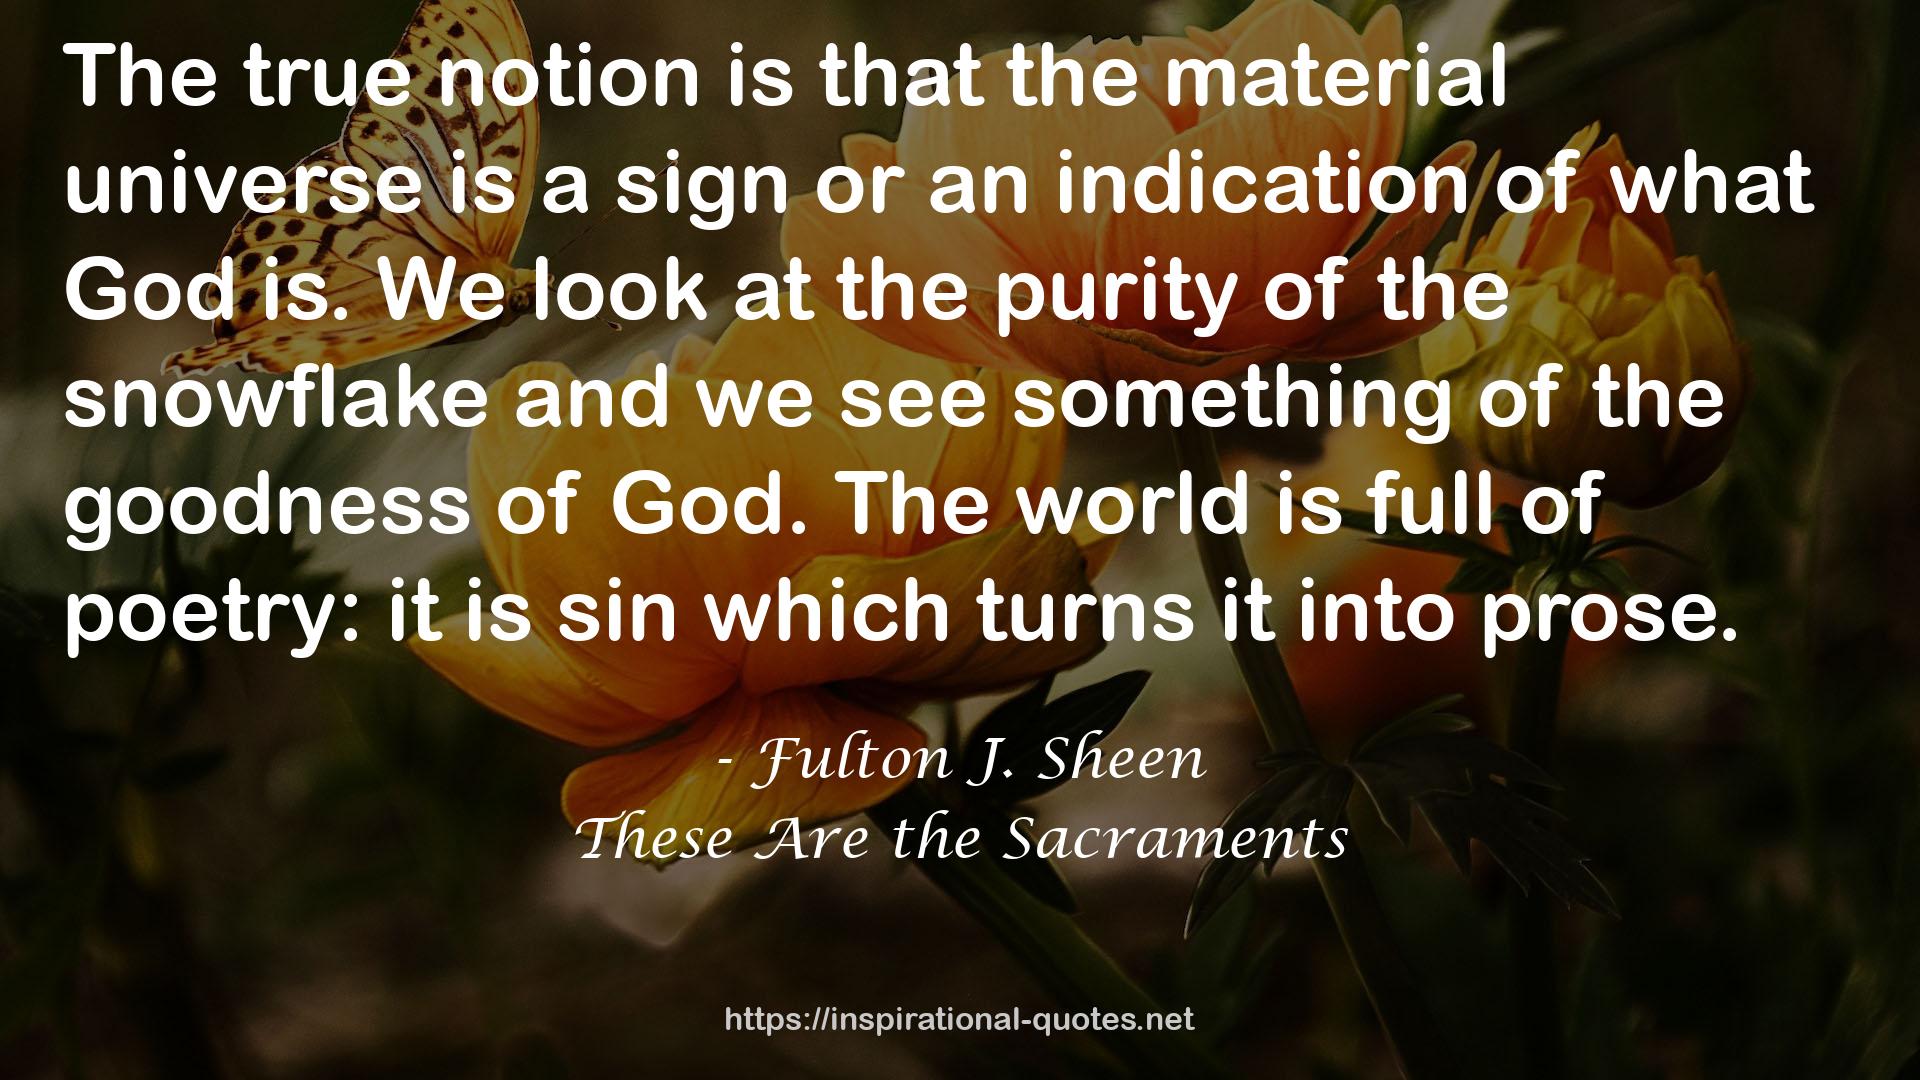 These Are the Sacraments QUOTES